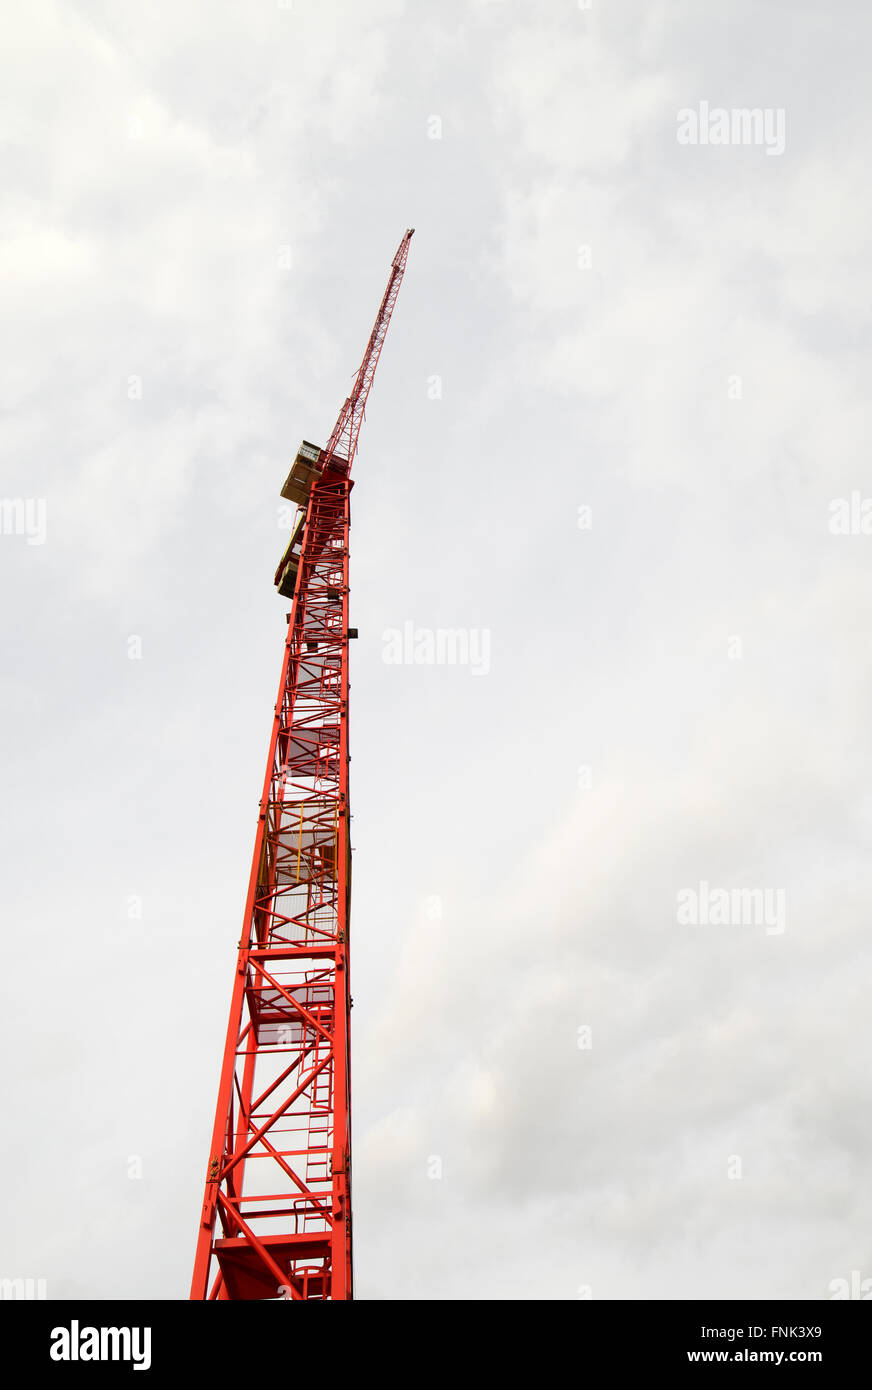 Looking up under a big red crane in Plymouth, Devon UK. Stock Photo